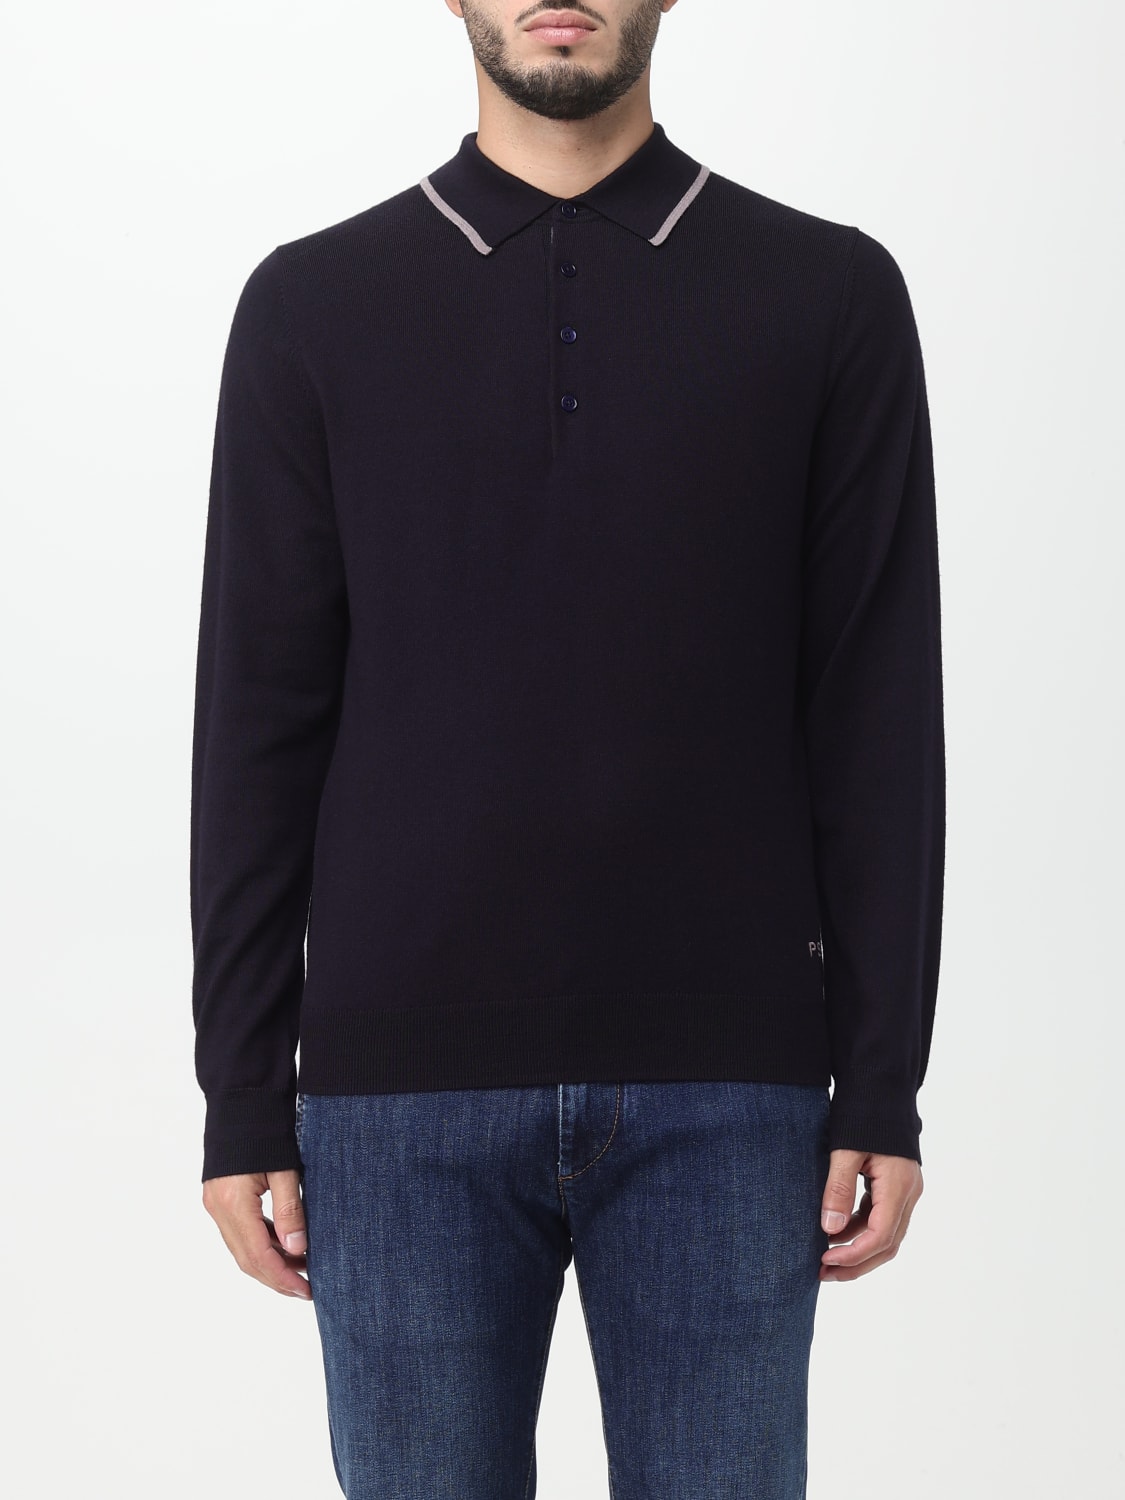 PS PAUL SMITH: Sweater men Paul Smith - Blue | PS PAUL SMITH sweater ...